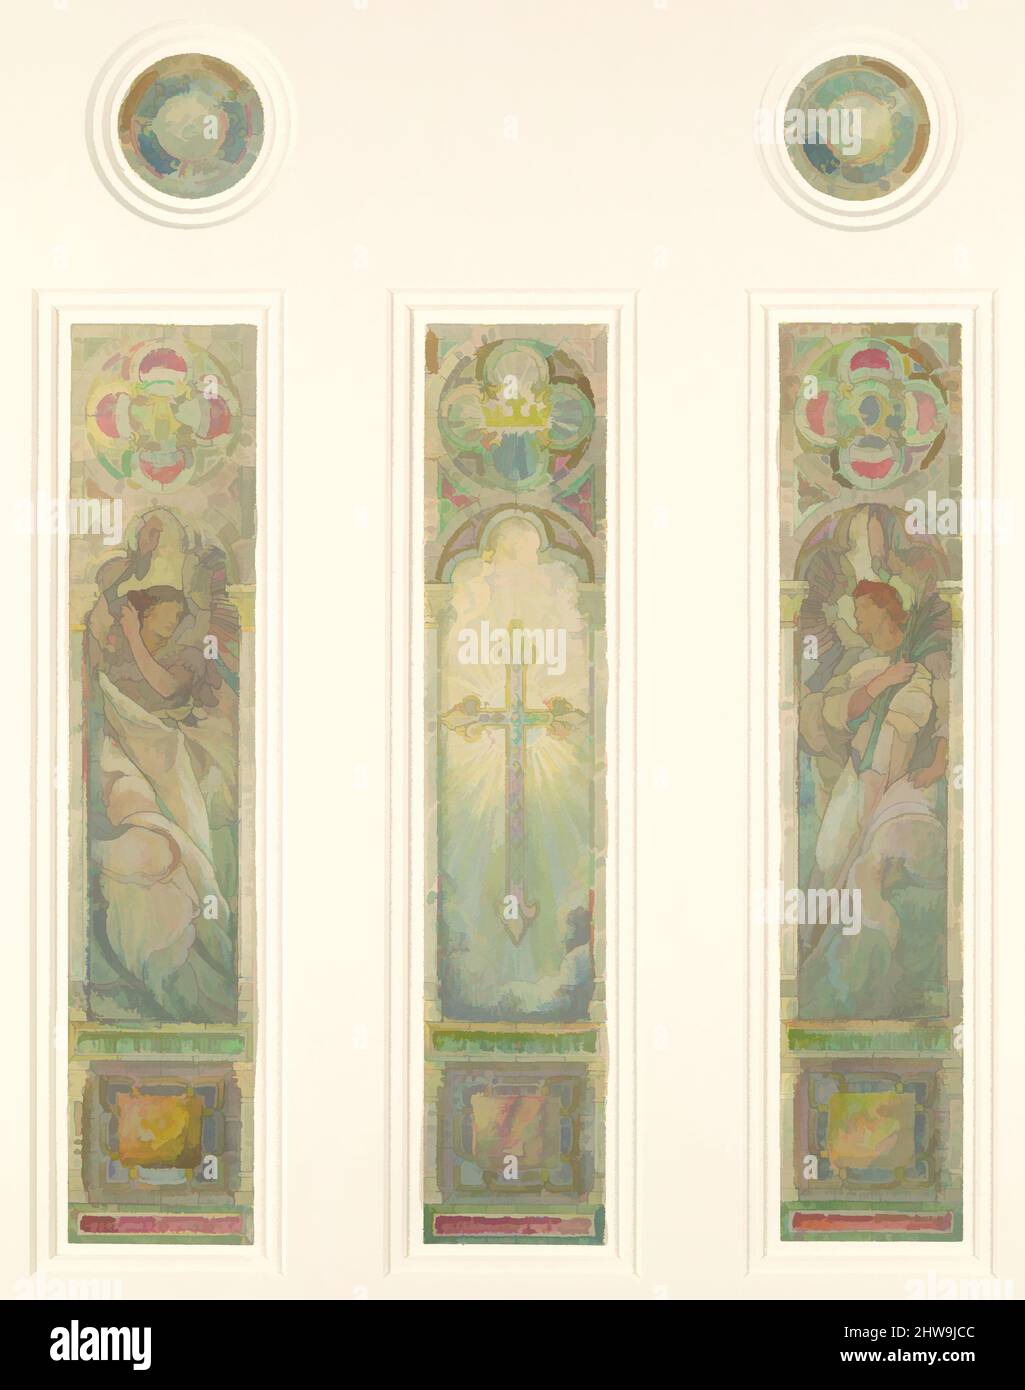 Art inspired by Design for triple light window, late 19th–early 20th century, Made in New York, United States, American, Watercolor, gouache, colored pencil, silver gelatin photograph on paper, and graphite, adhered to off-white wove paper cut into three rectangular windows and two, Classic works modernized by Artotop with a splash of modernity. Shapes, color and value, eye-catching visual impact on art. Emotions through freedom of artworks in a contemporary way. A timeless message pursuing a wildly creative new direction. Artists turning to the digital medium and creating the Artotop NFT Stock Photo